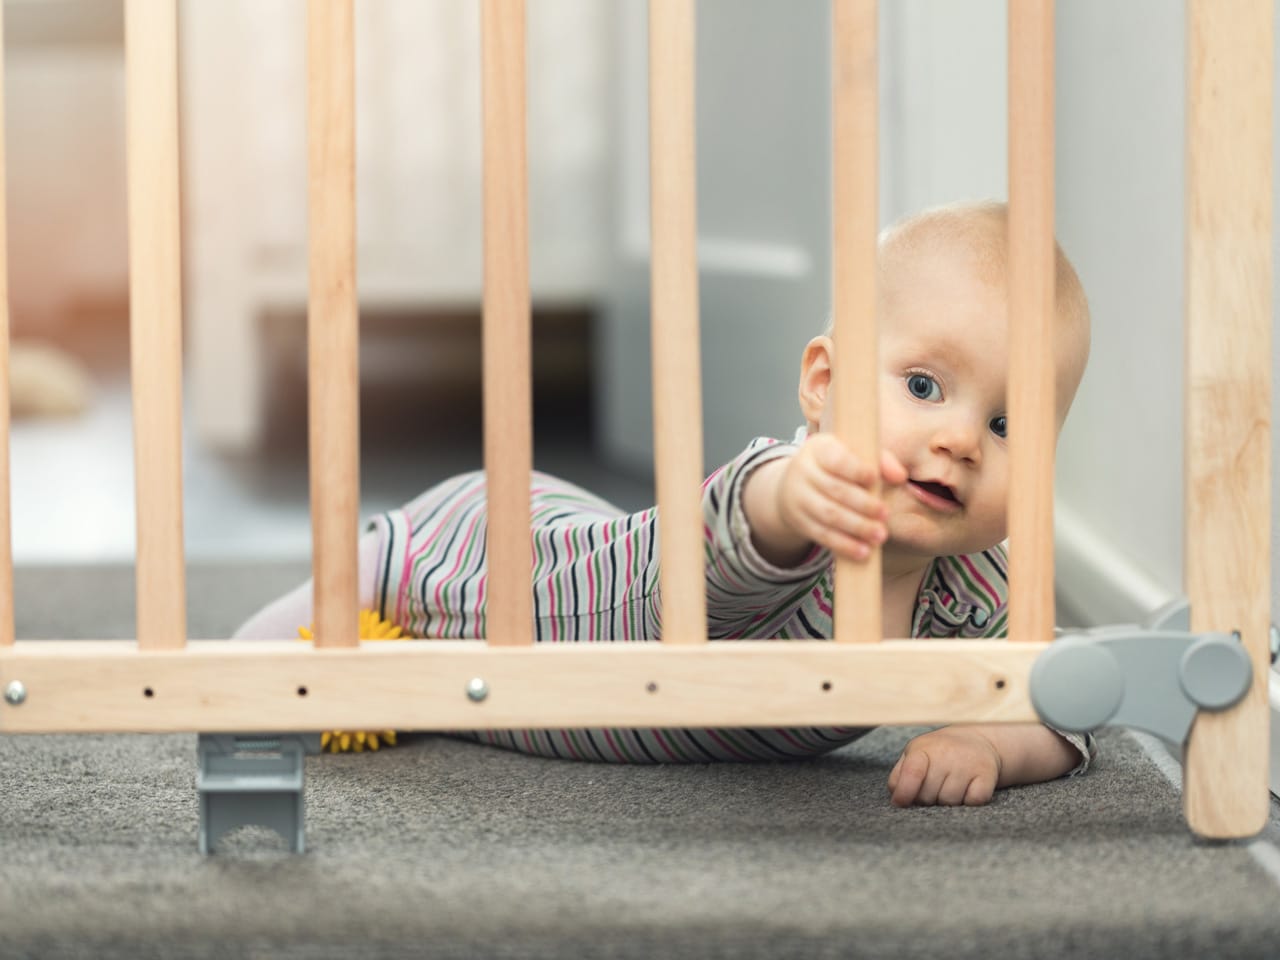 Is your baby gate dangerous? Here's how to tell